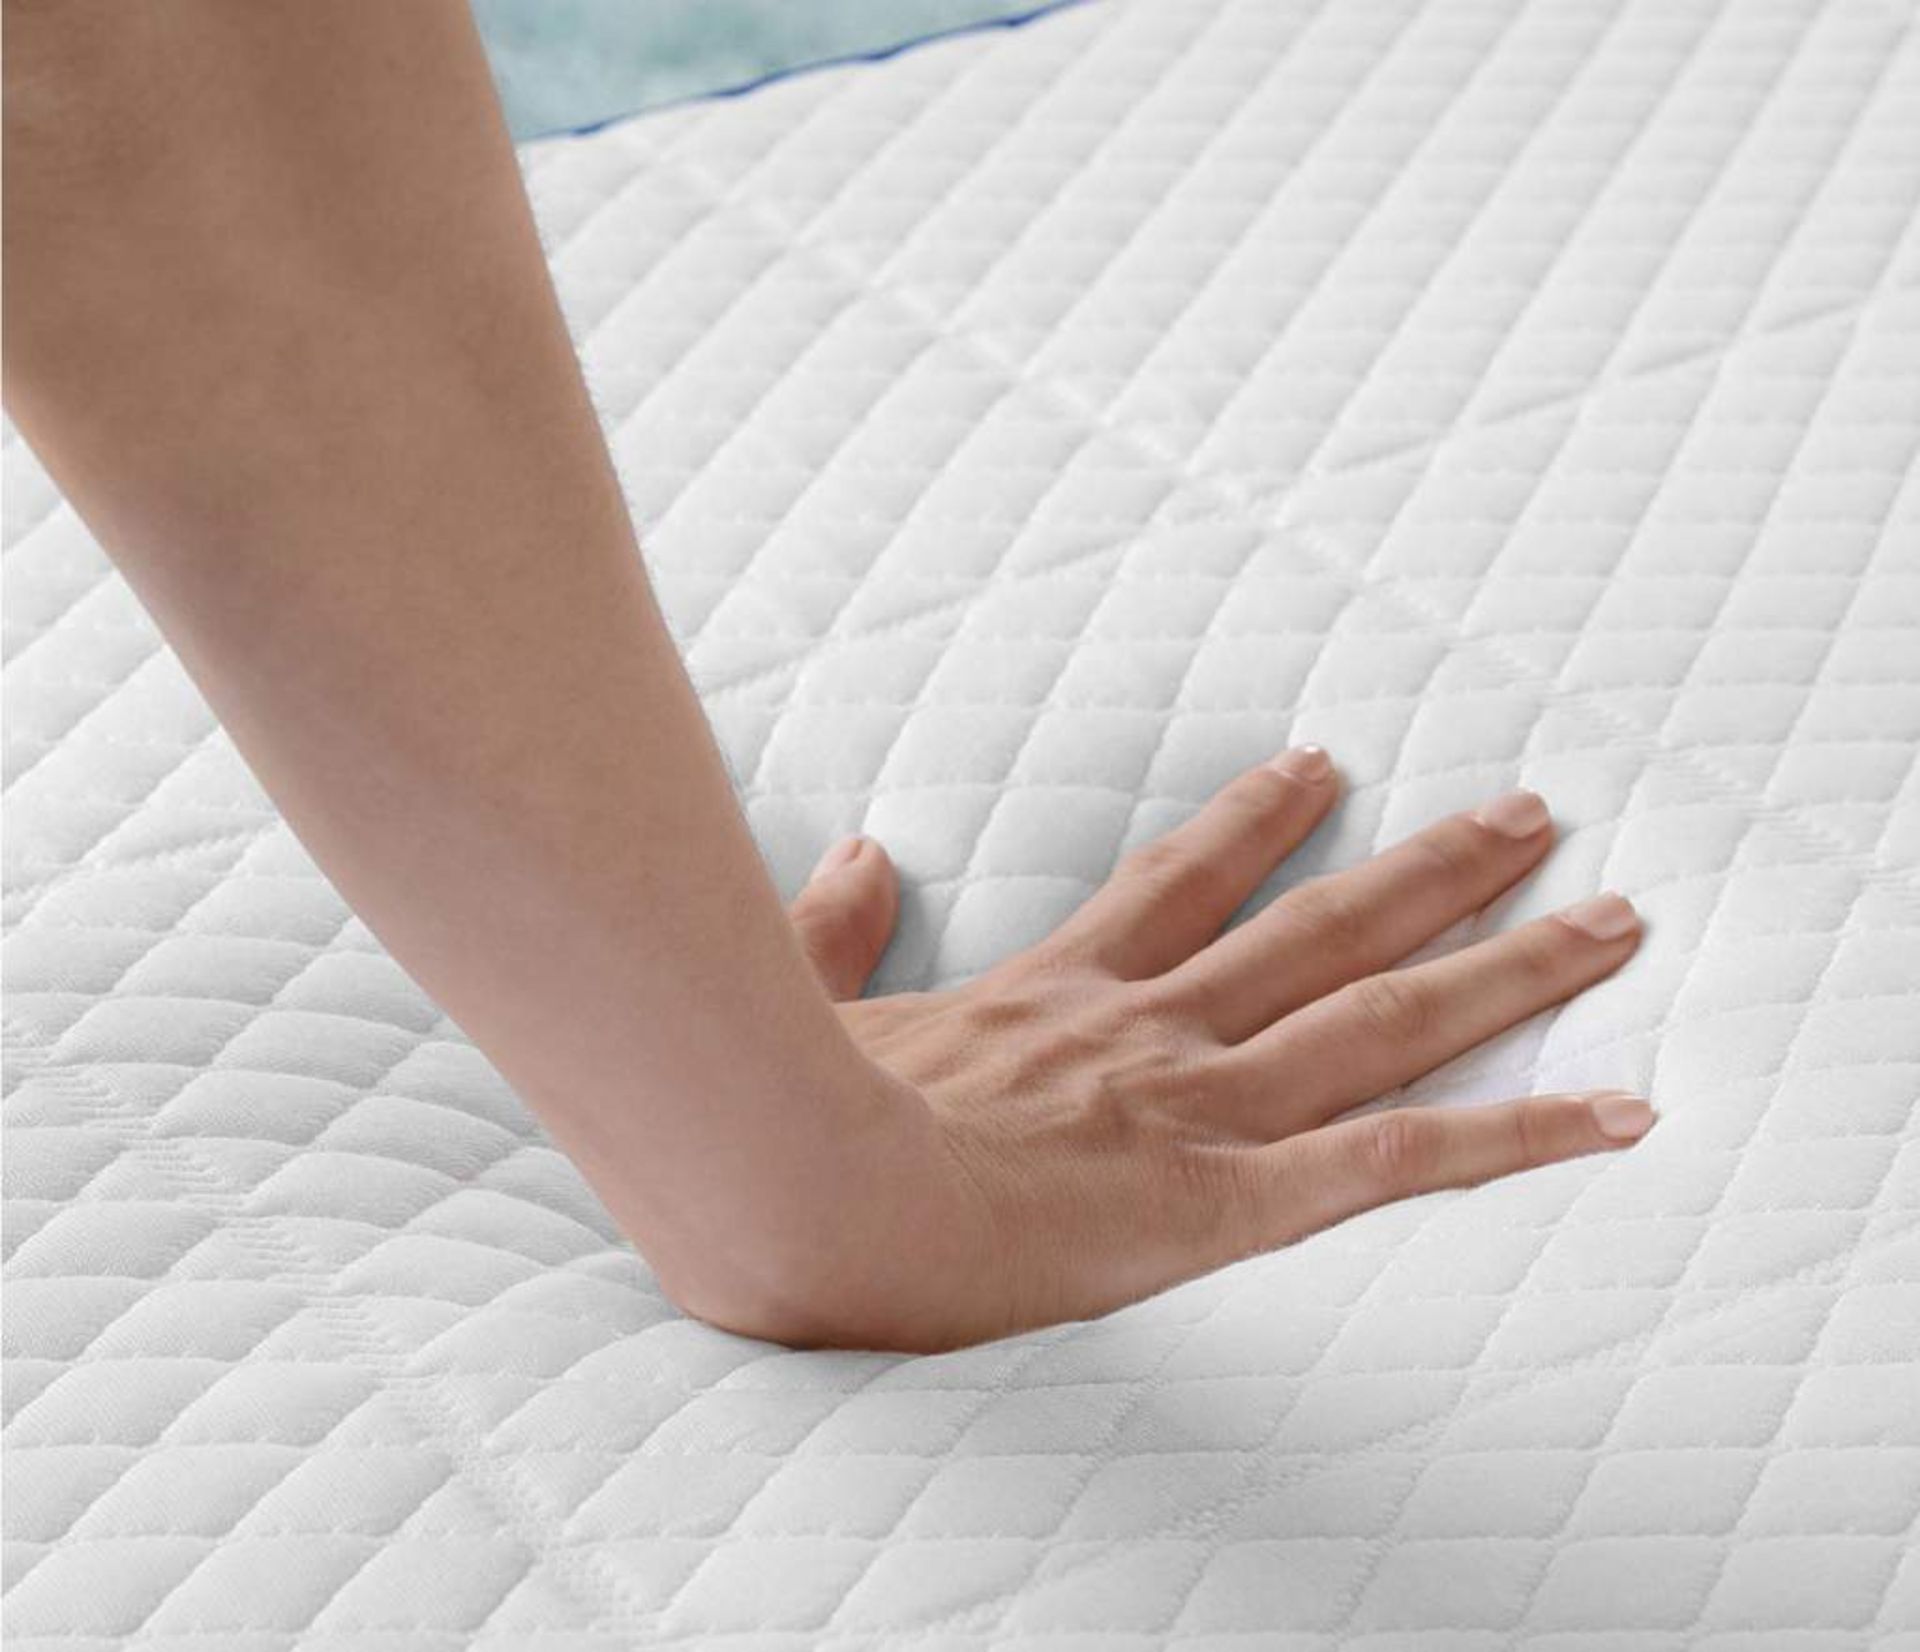 x1|5ft Nectar Professionally Refurbished Smart Pressure Relieving Memory Foam Mattress|RRP £669| - Image 2 of 2